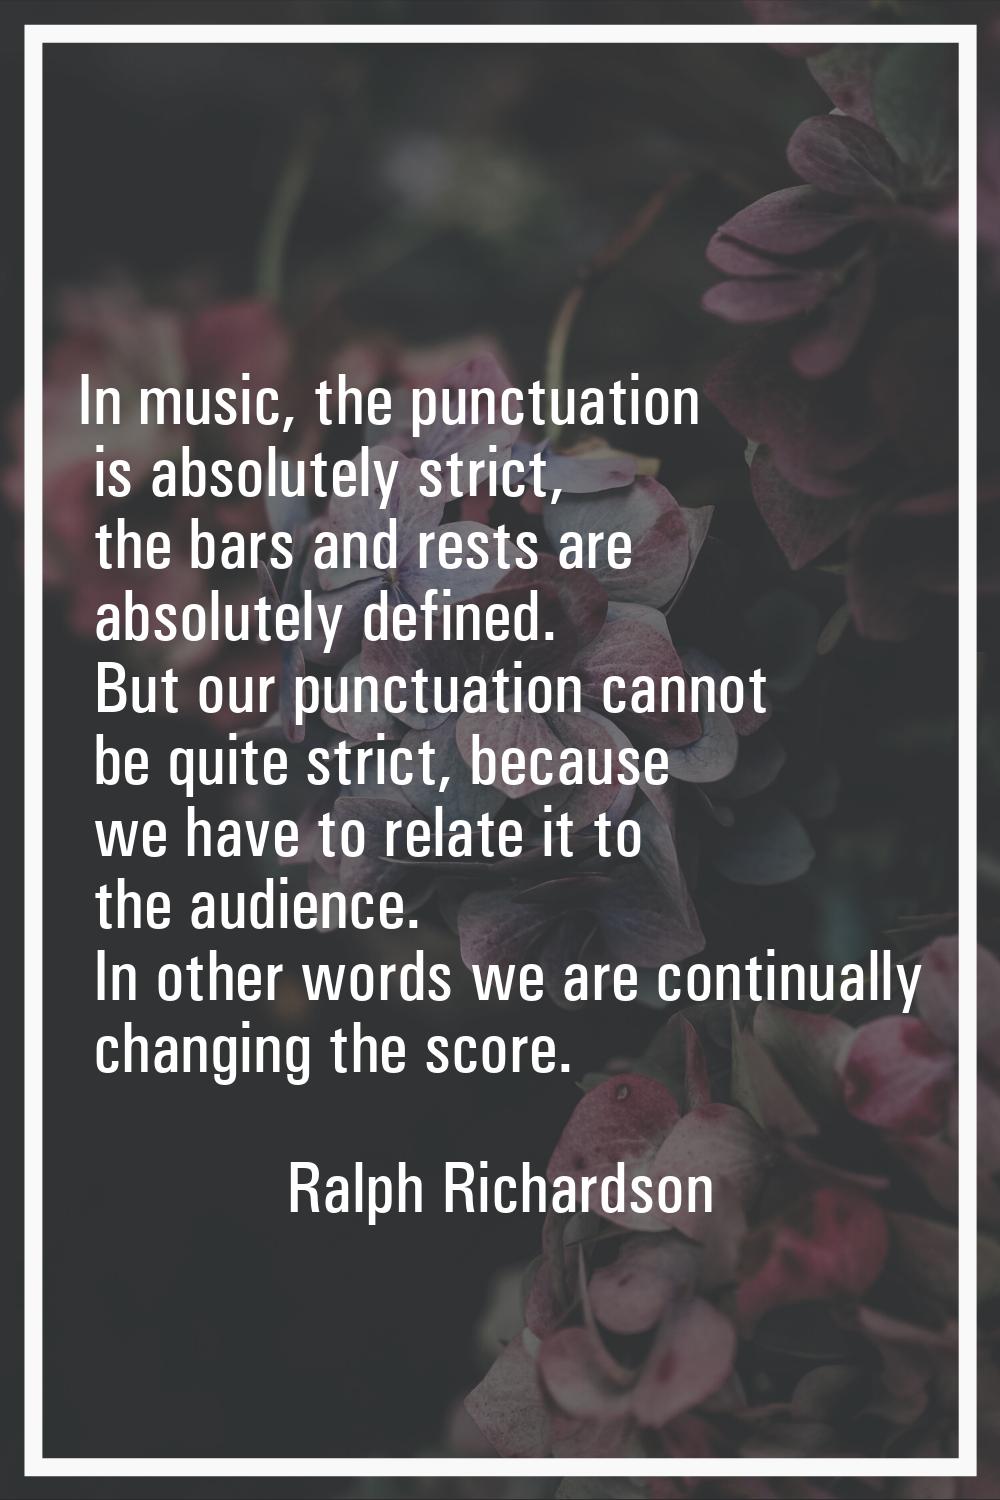 In music, the punctuation is absolutely strict, the bars and rests are absolutely defined. But our 